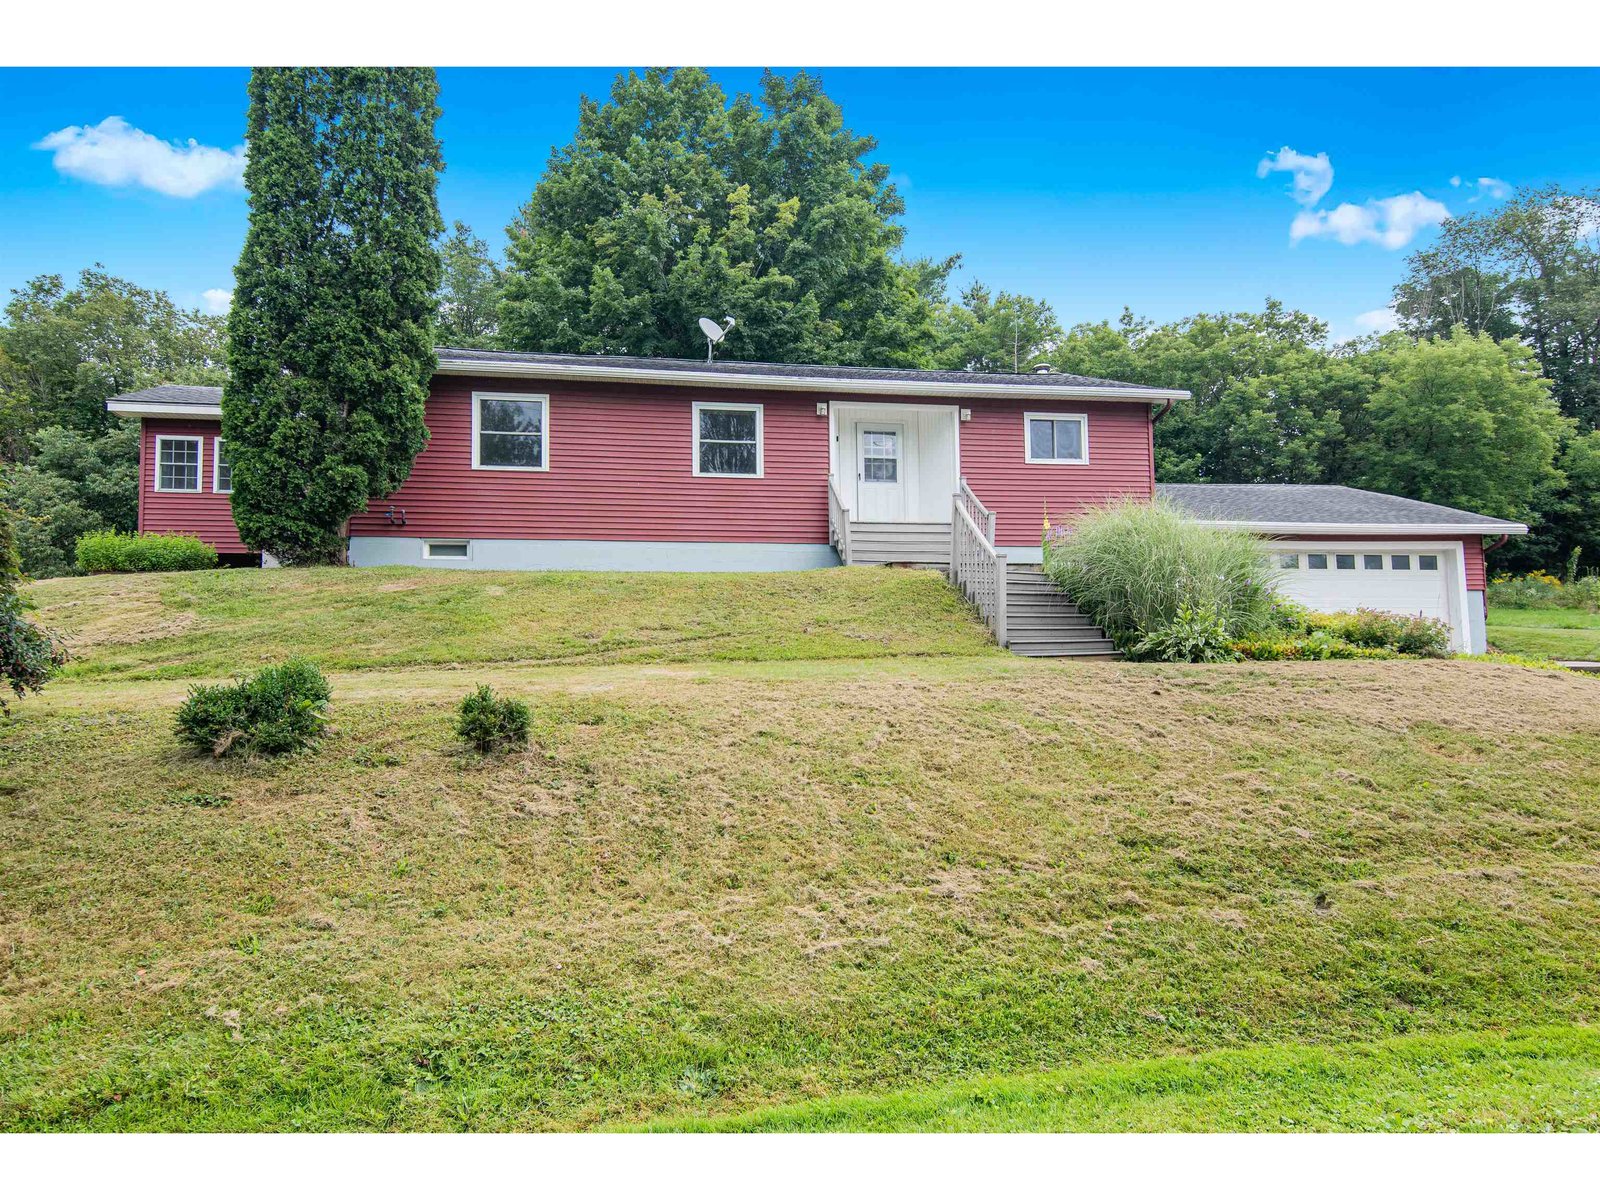 Sold property in Richford